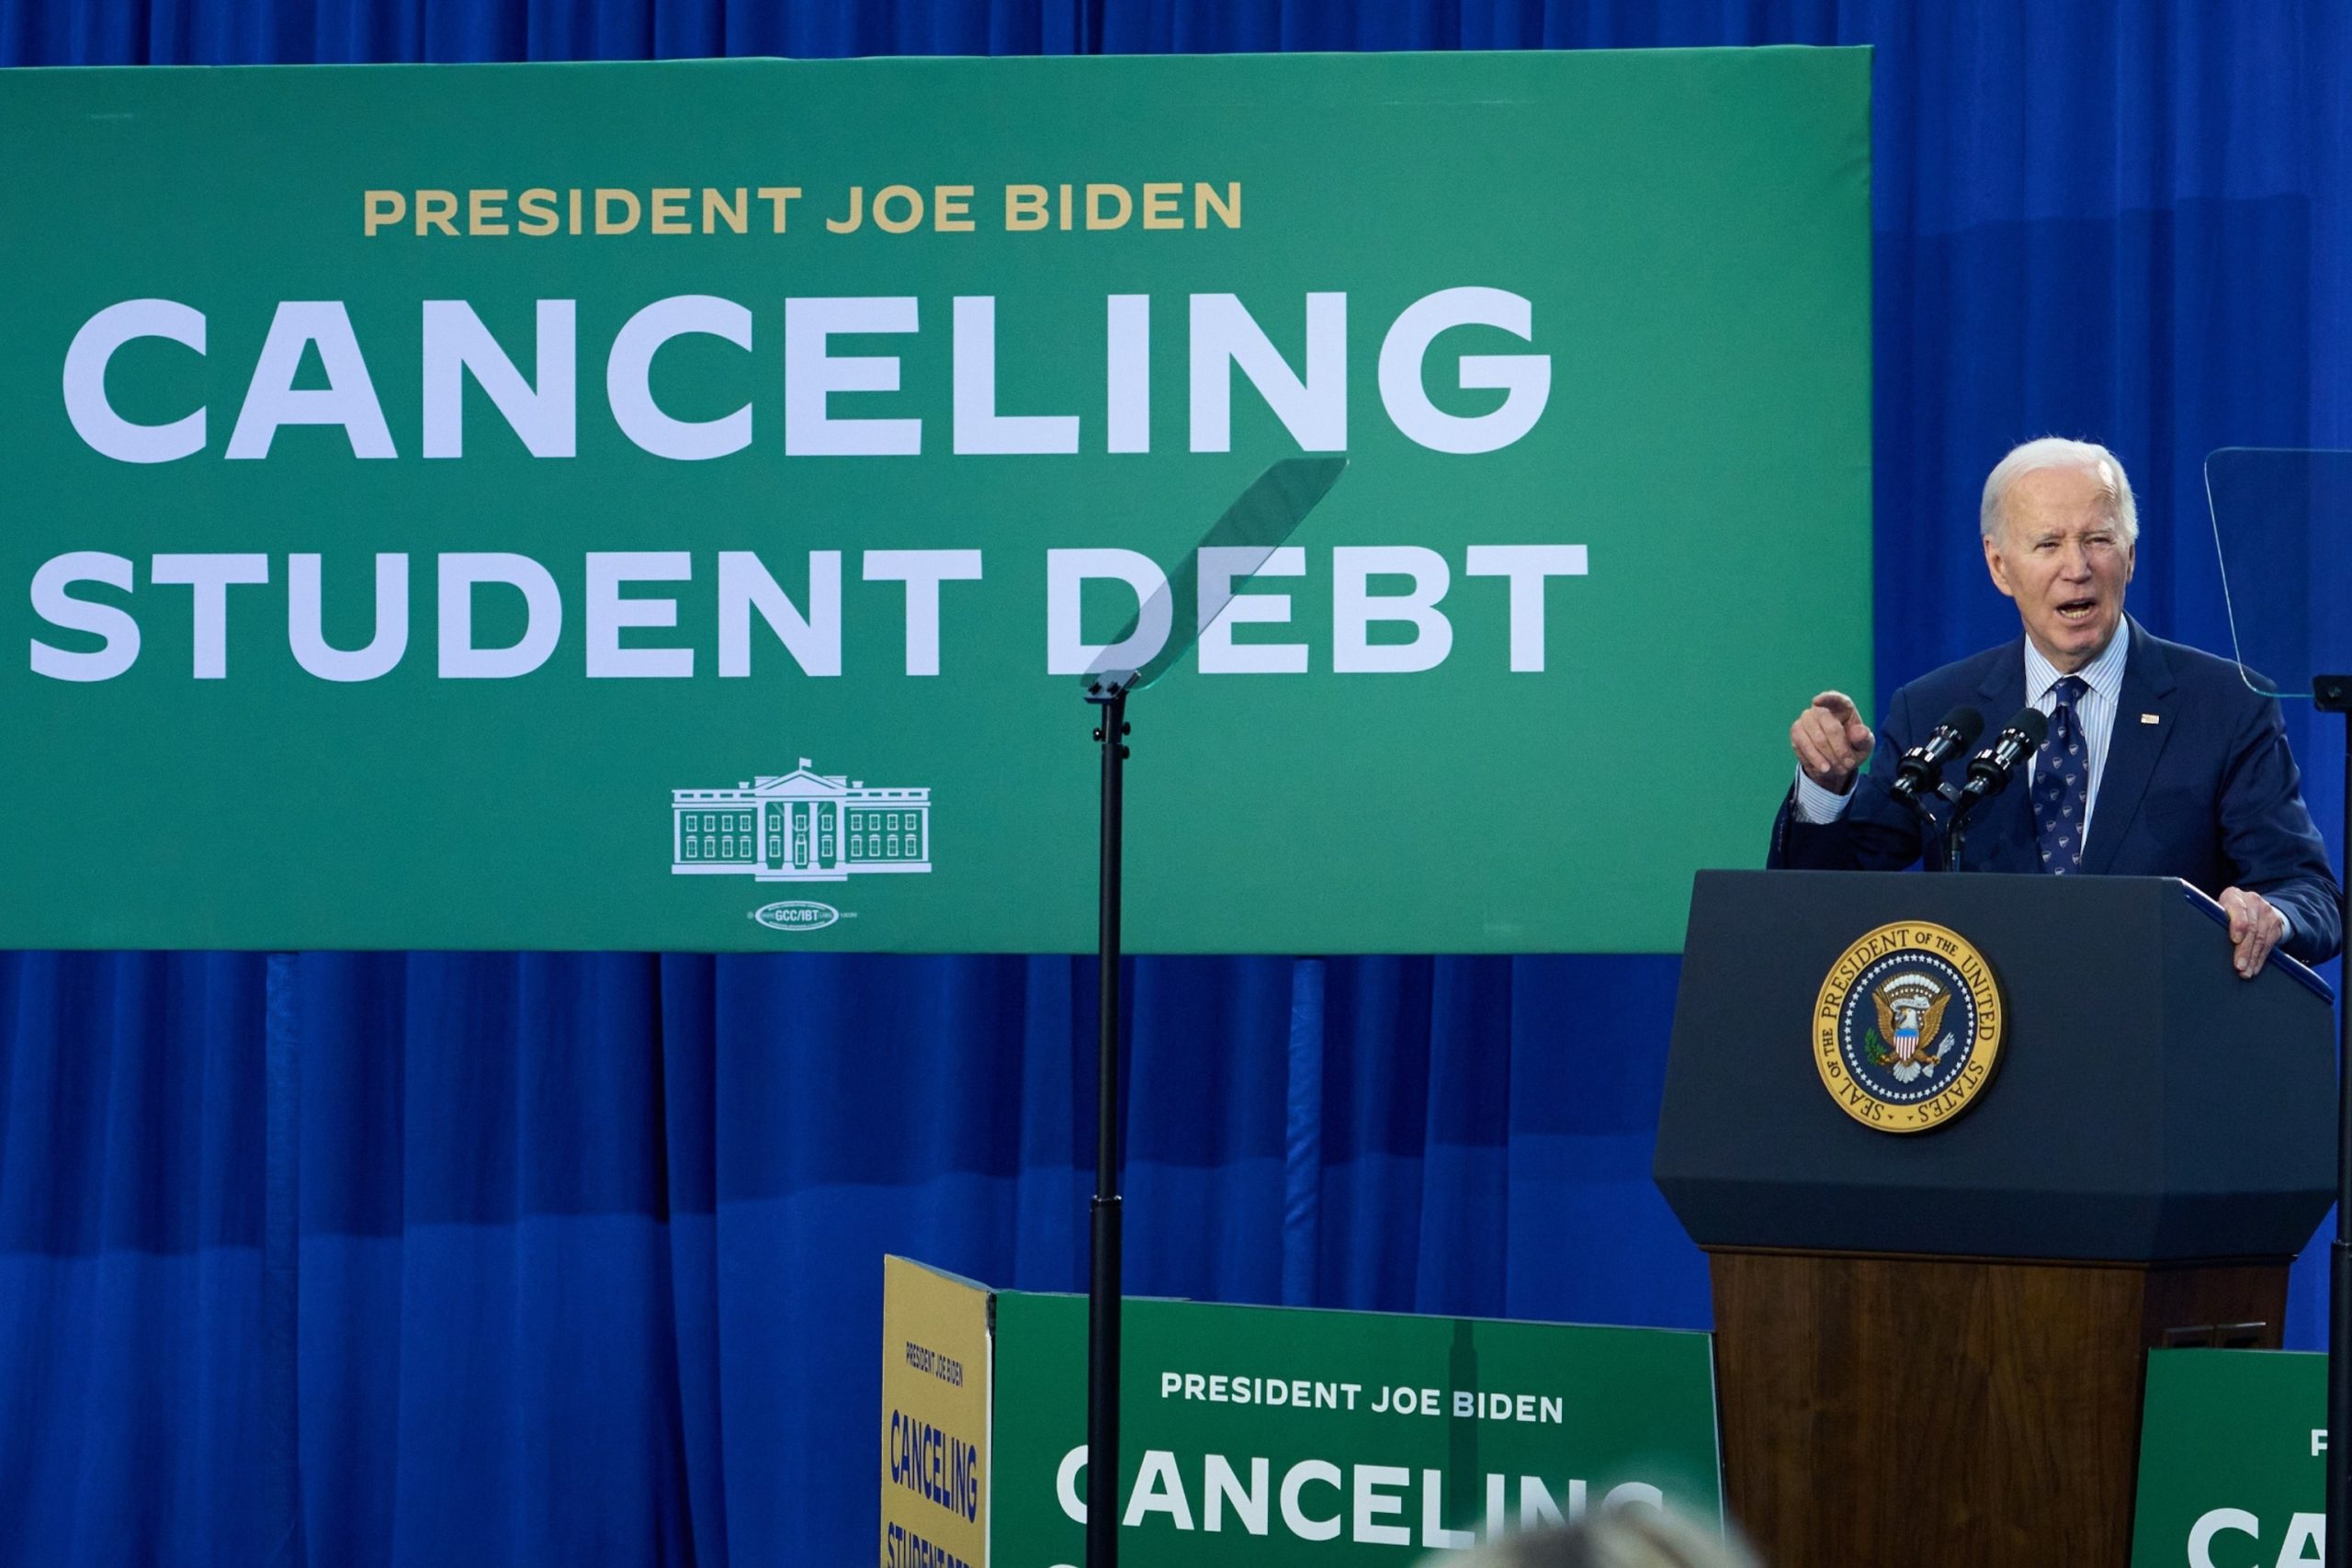 Student loan repayment plan allowed to proceed, giving Biden temporary win